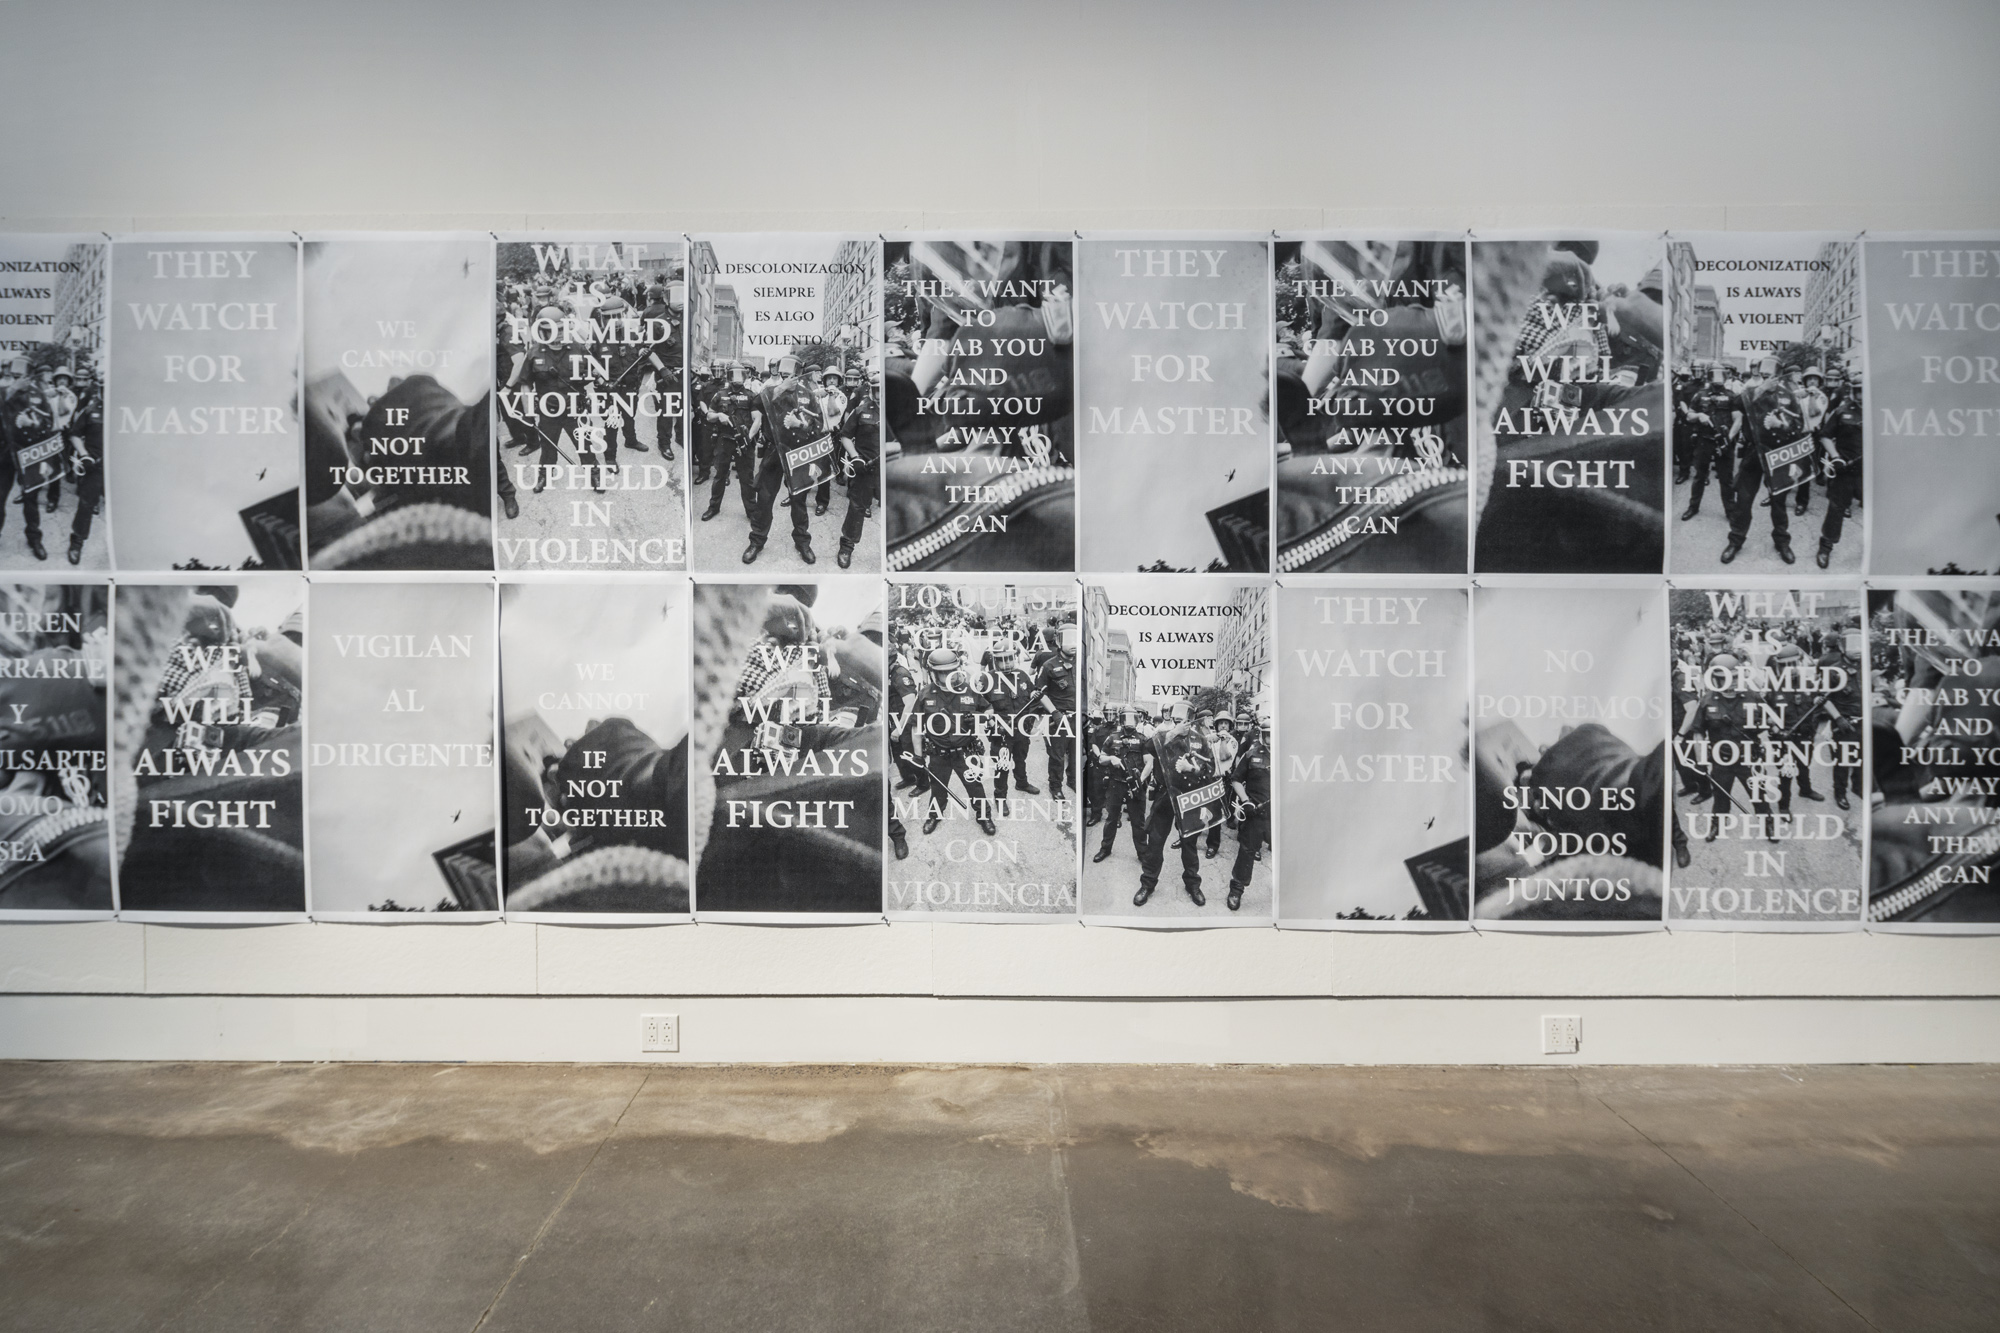 Two rows of black and white postered installed on a white exhibition walls. The posters are made up of black and white photographs of police barricades formed at protests, a city sky, and protestors. Over the photographs are a series of phrases including “We Will Always Fight”, “Decolonization Is Always A Violent Event”, “What Is Formed In Violence Is Upheld In Violence”, “They Watch For Master”, and “We Cannot If Not Together” in both English & Spanish.